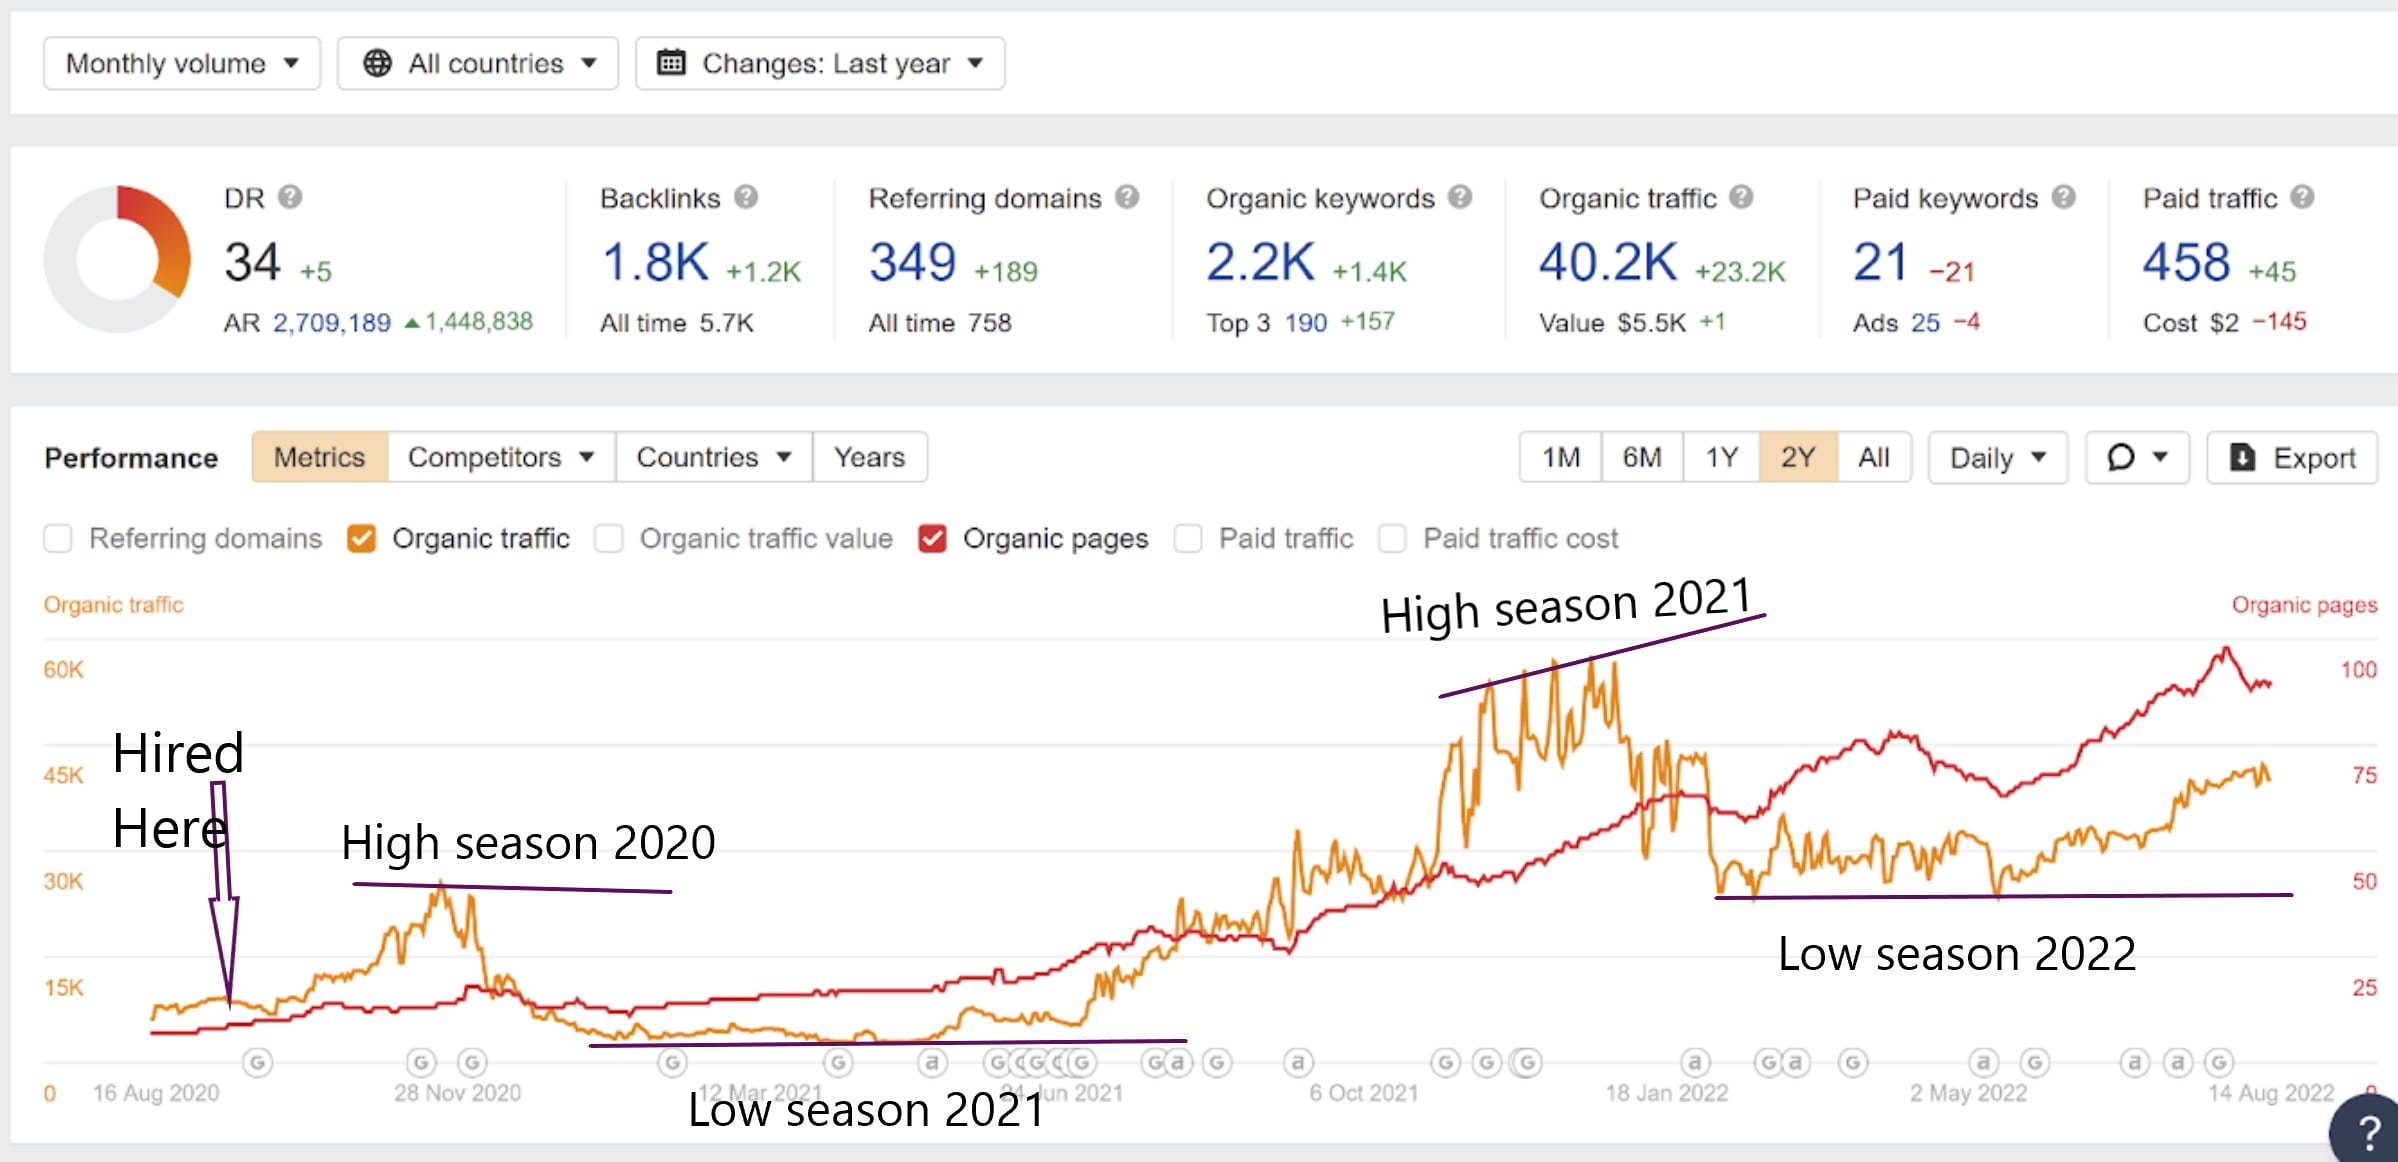 Traffic and organic pages evolution